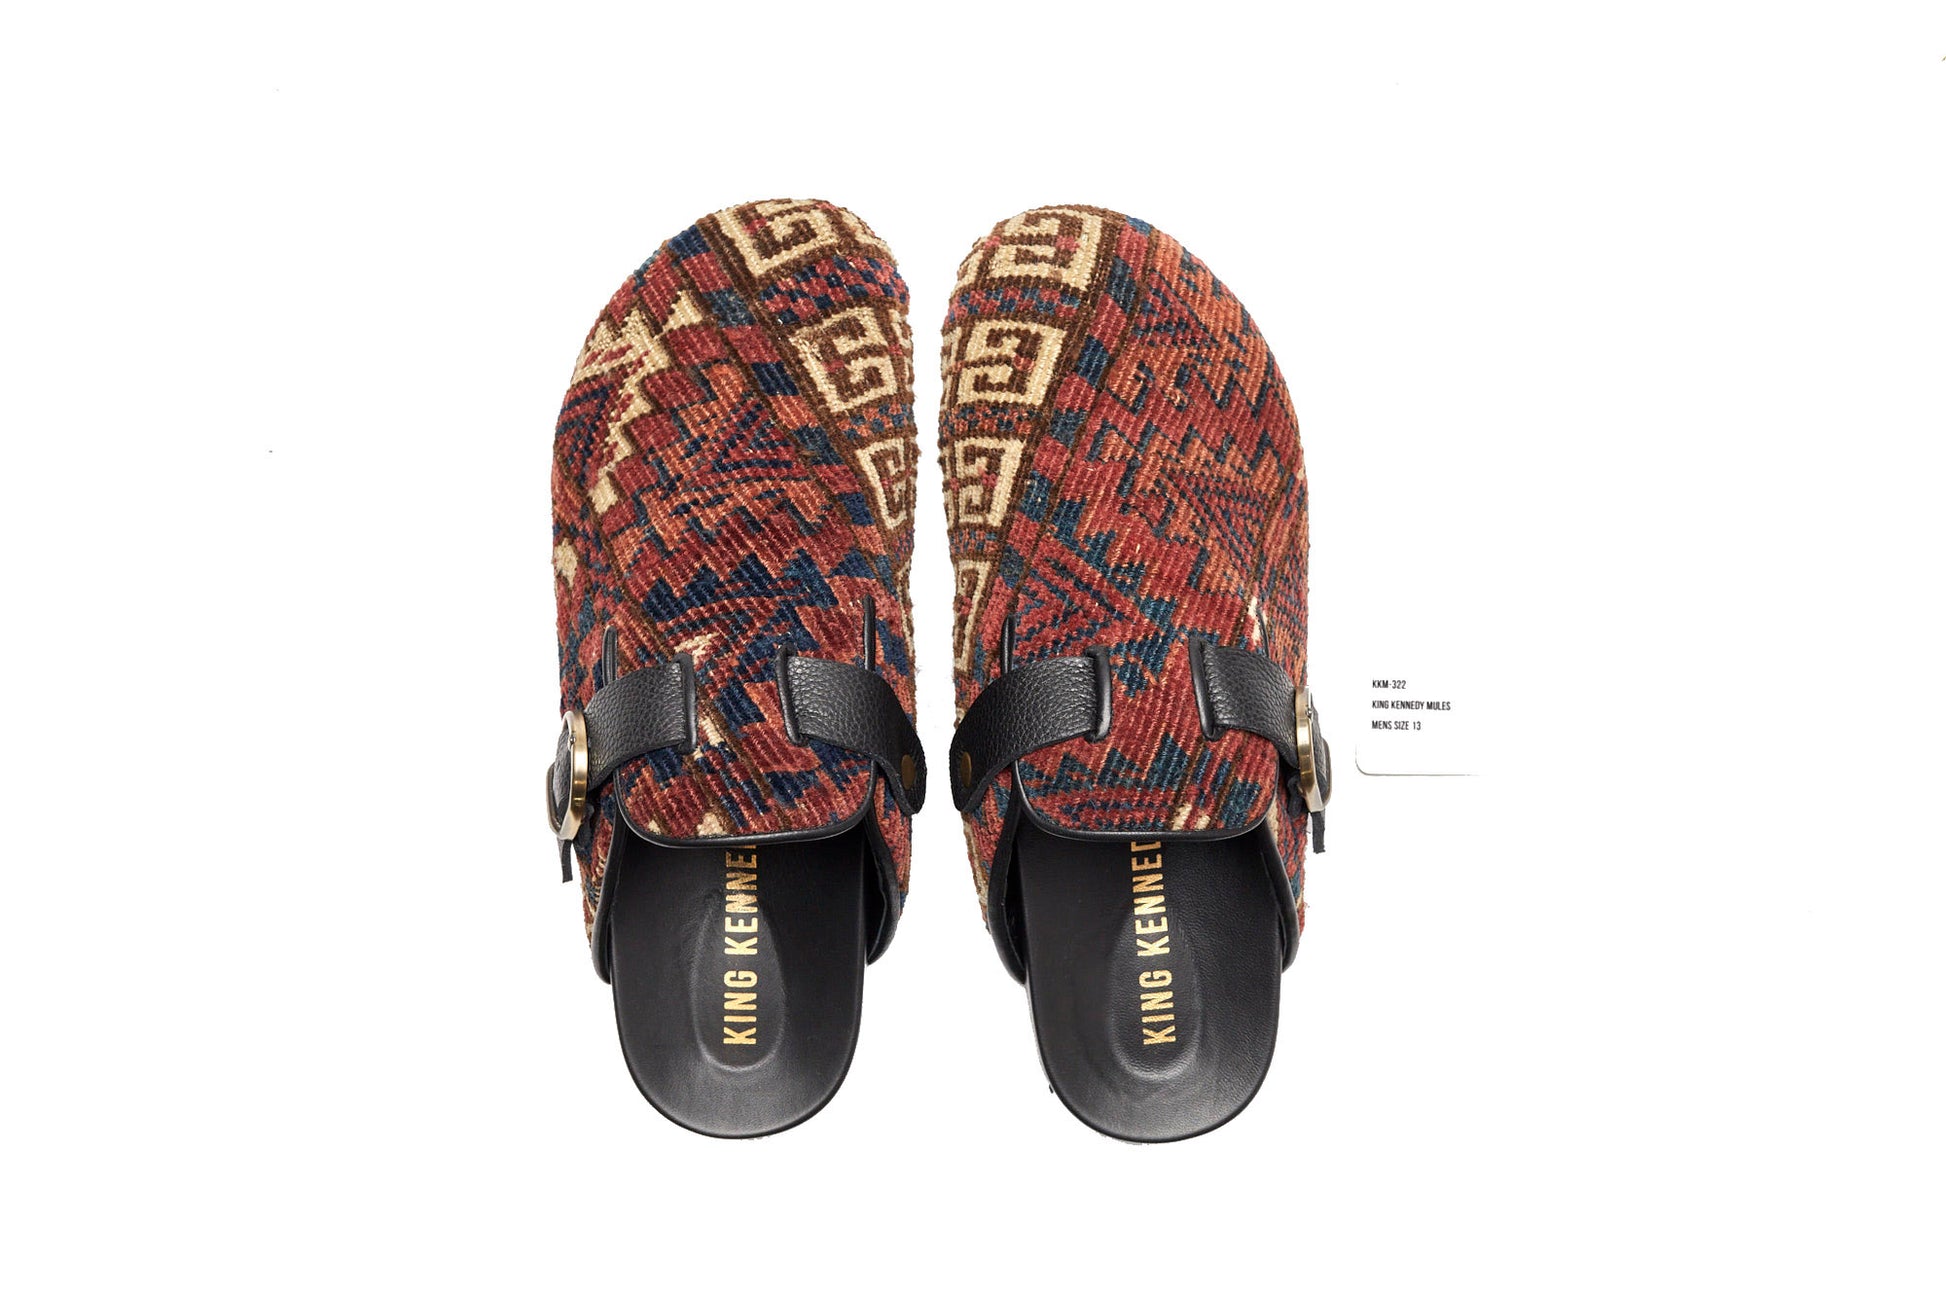 King Kennedy Rug Mules are one-of-a-kind and made of 100 year old antique Persian rug fragments with soft lambskin footbed and comfortable rubber sole. This pair is made of an antique Persian rug with a beautifully faded red base, cream, blue and amber design motifs.  